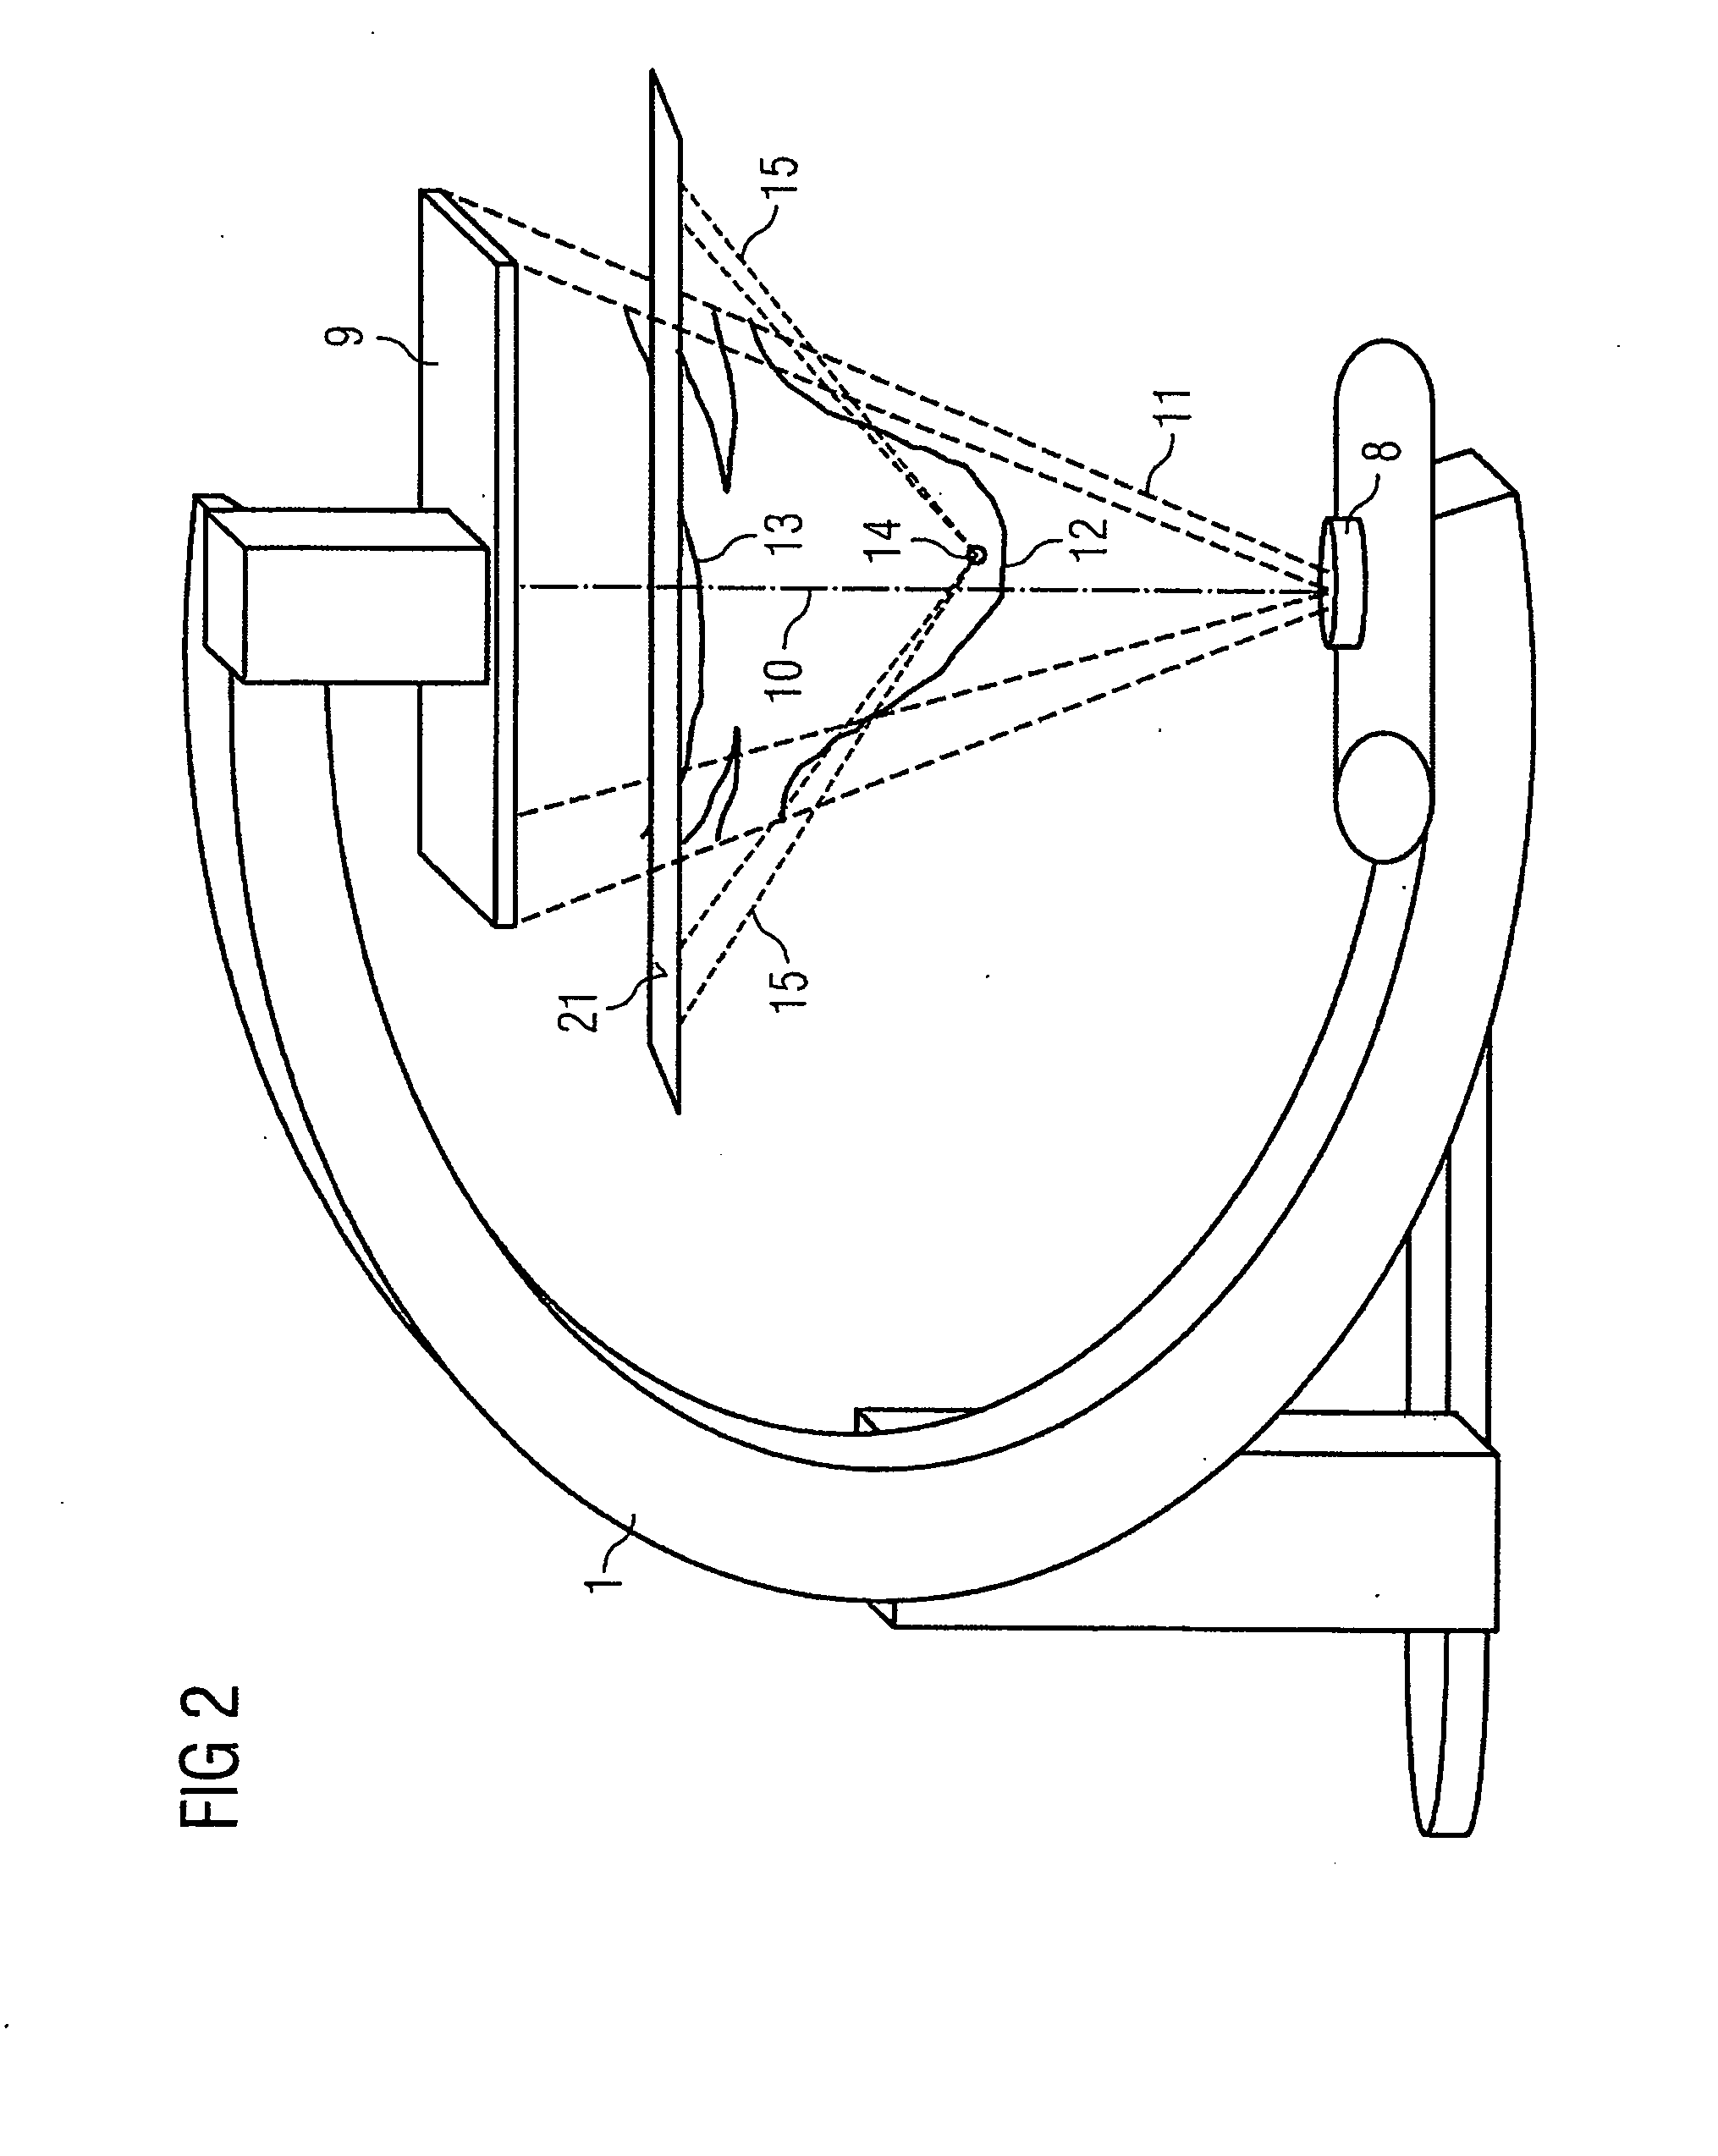 Device for merging a 2D radioscopy image with an image from a 3D image data record